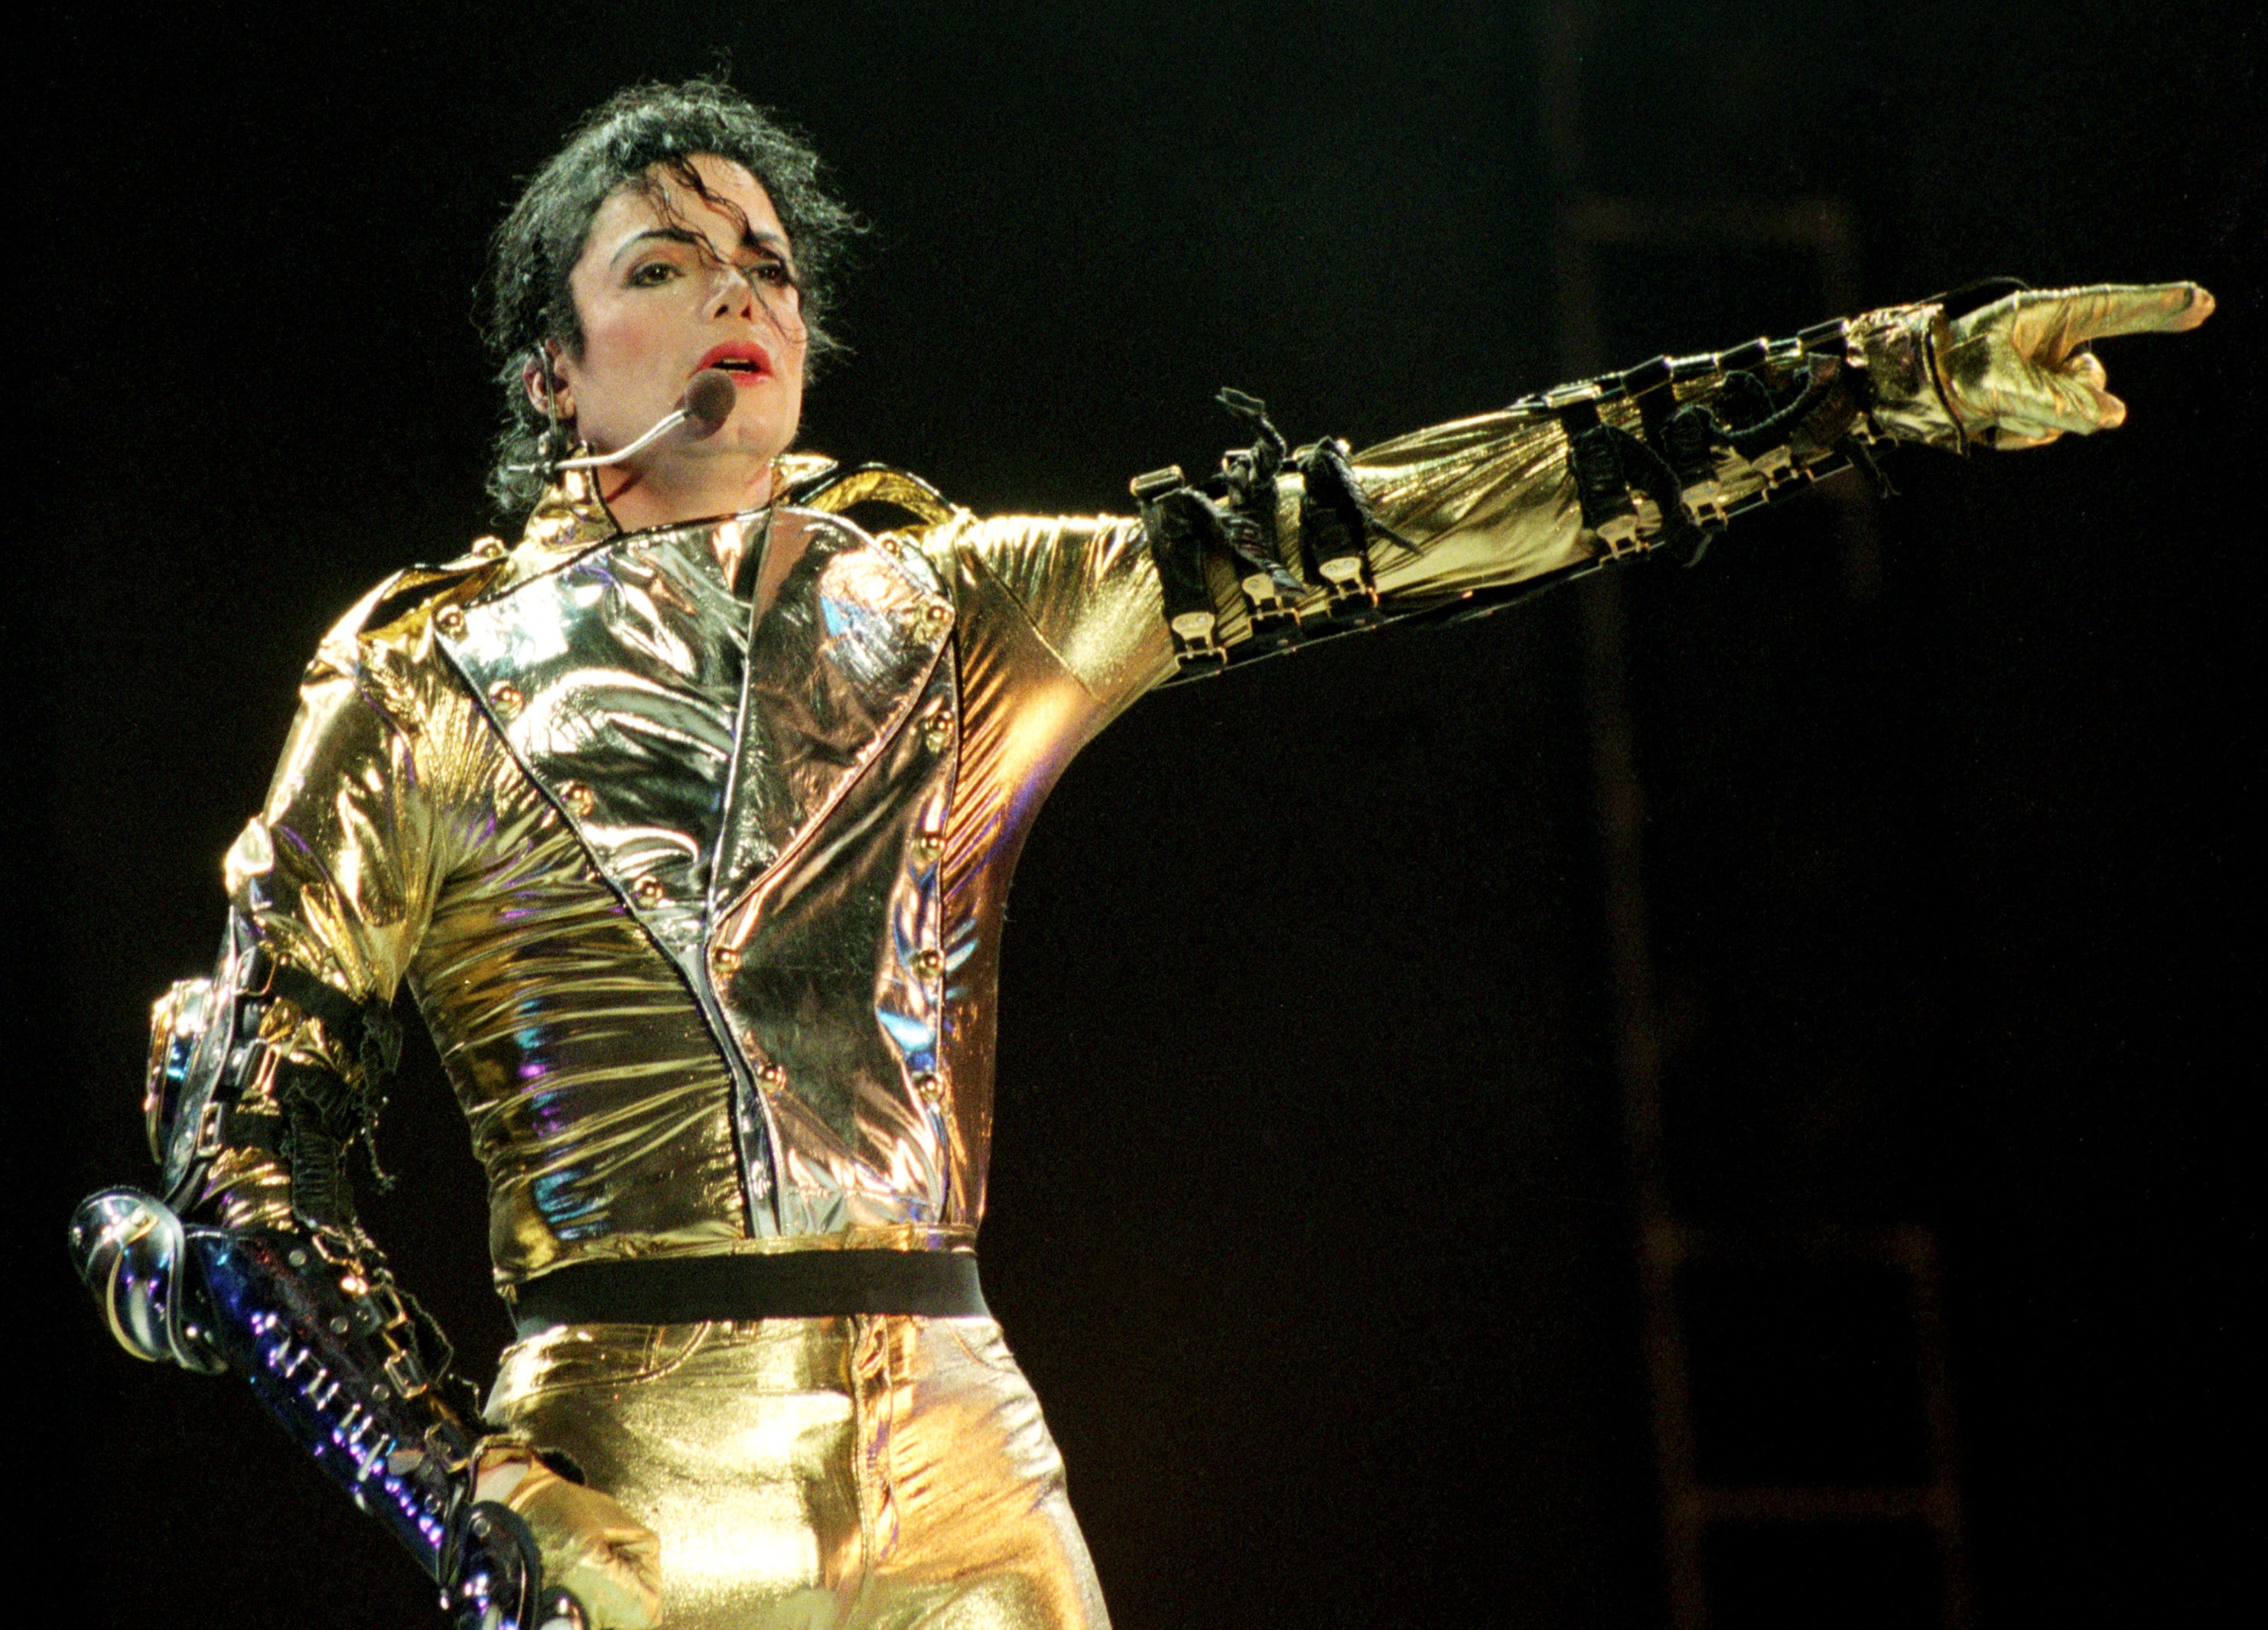 Michael Jackson performs during his HIStory tour in 1996